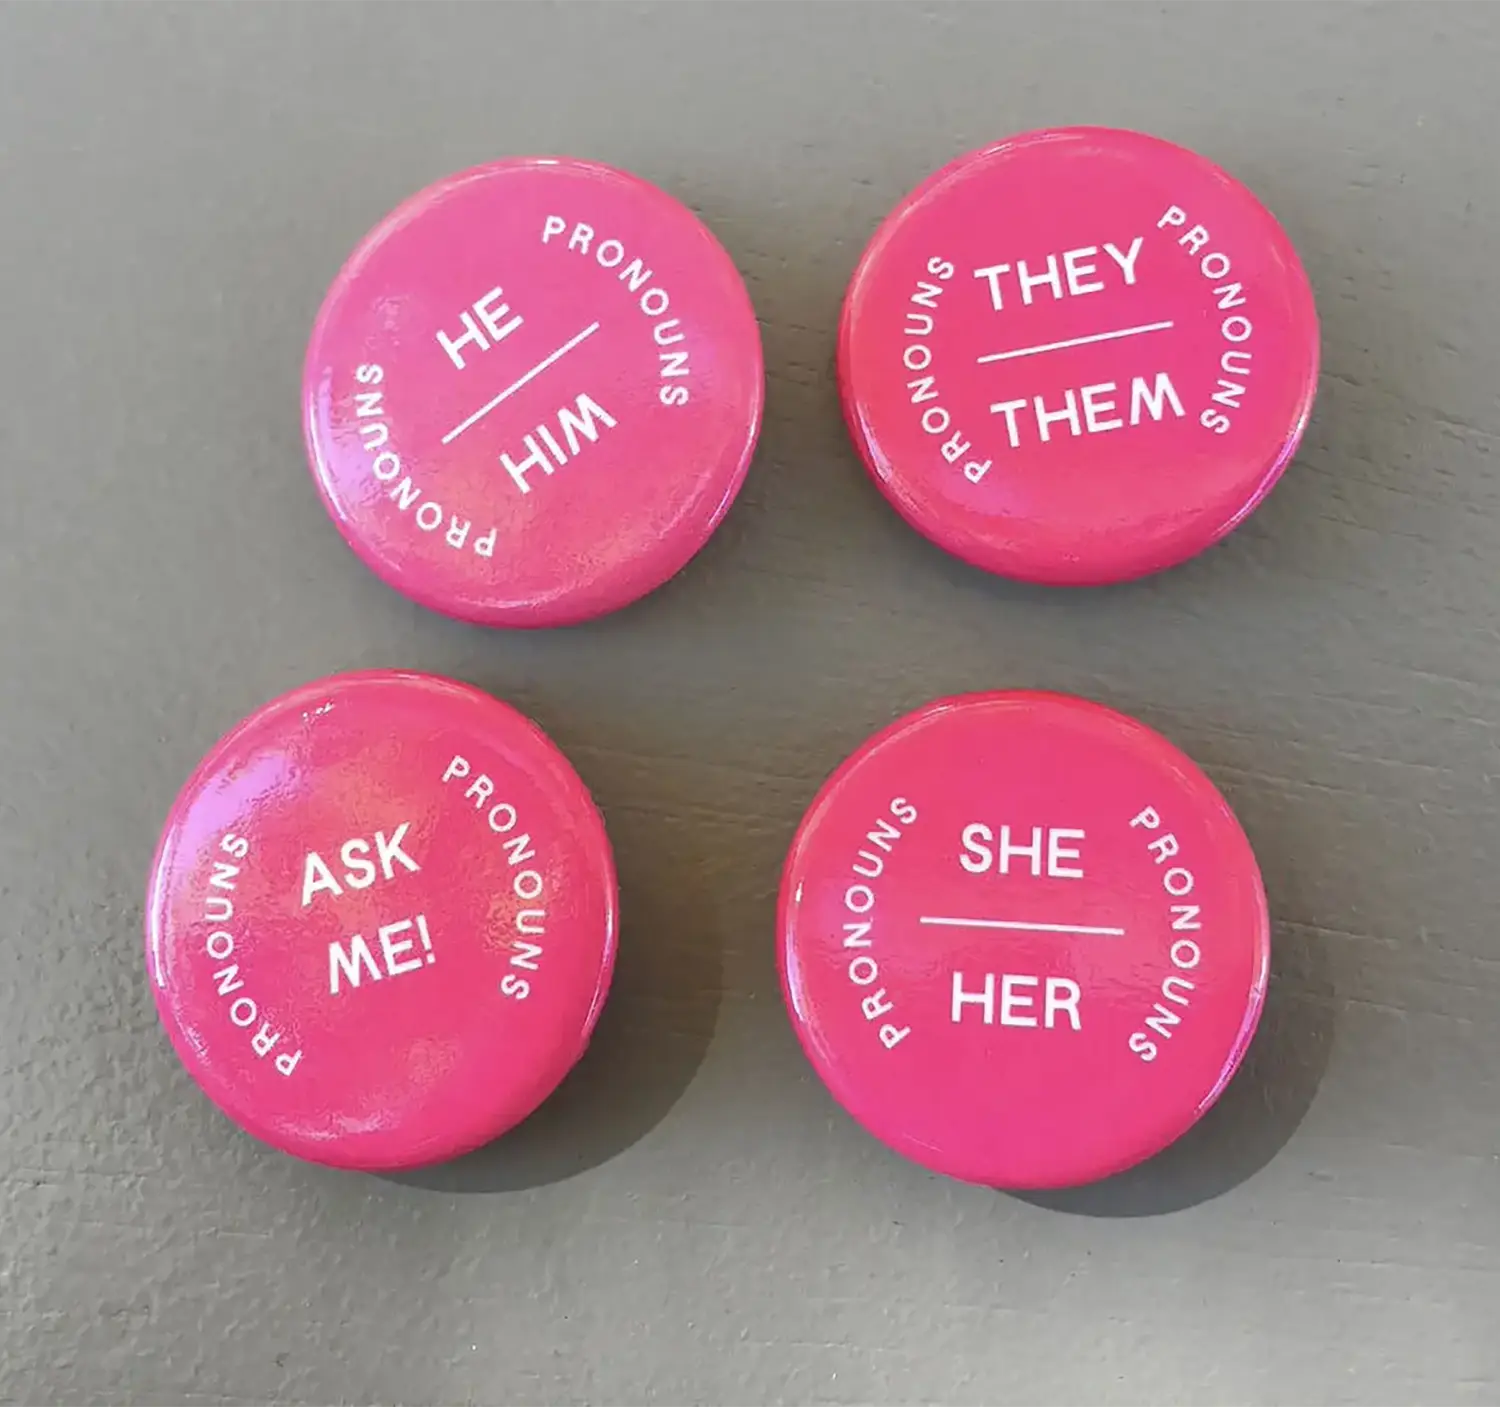 Four bright pink pronoun pins. Around the edge of each, it says “Pronouns,” in the center of each it says, respectively, “They/Them,” “She/Her,” “He/Him,” and “Ask Me!”